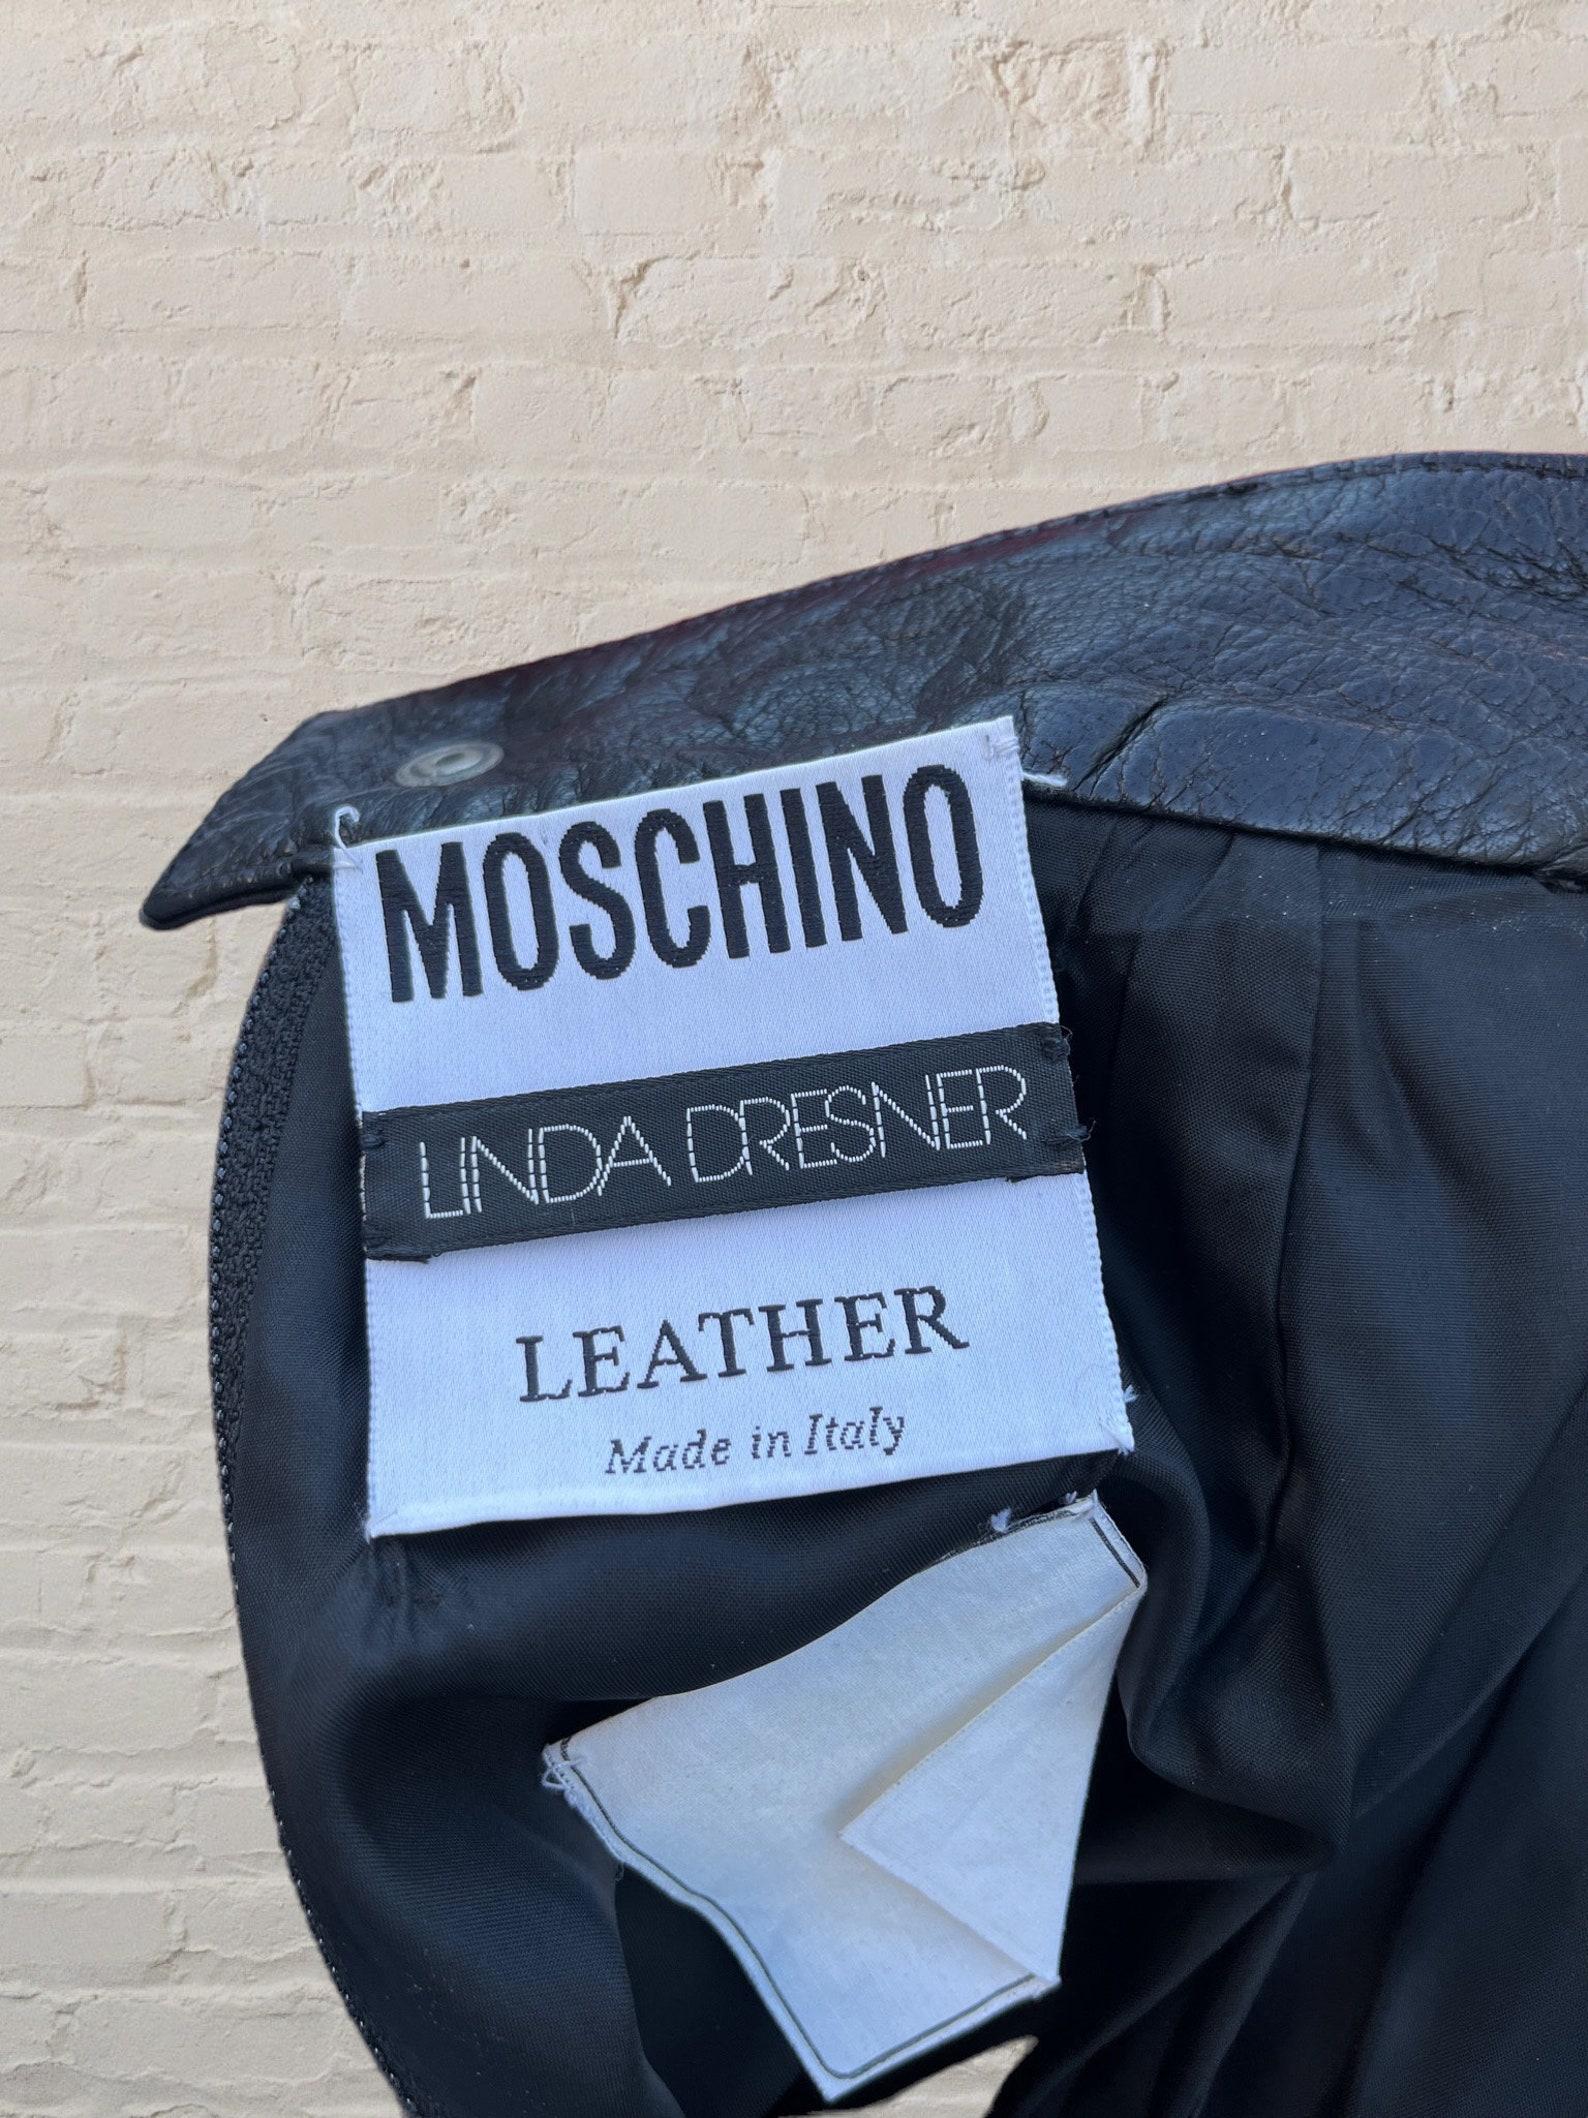 Moschino Black Leather Mirror Skirt, Circa 1990 For Sale 6